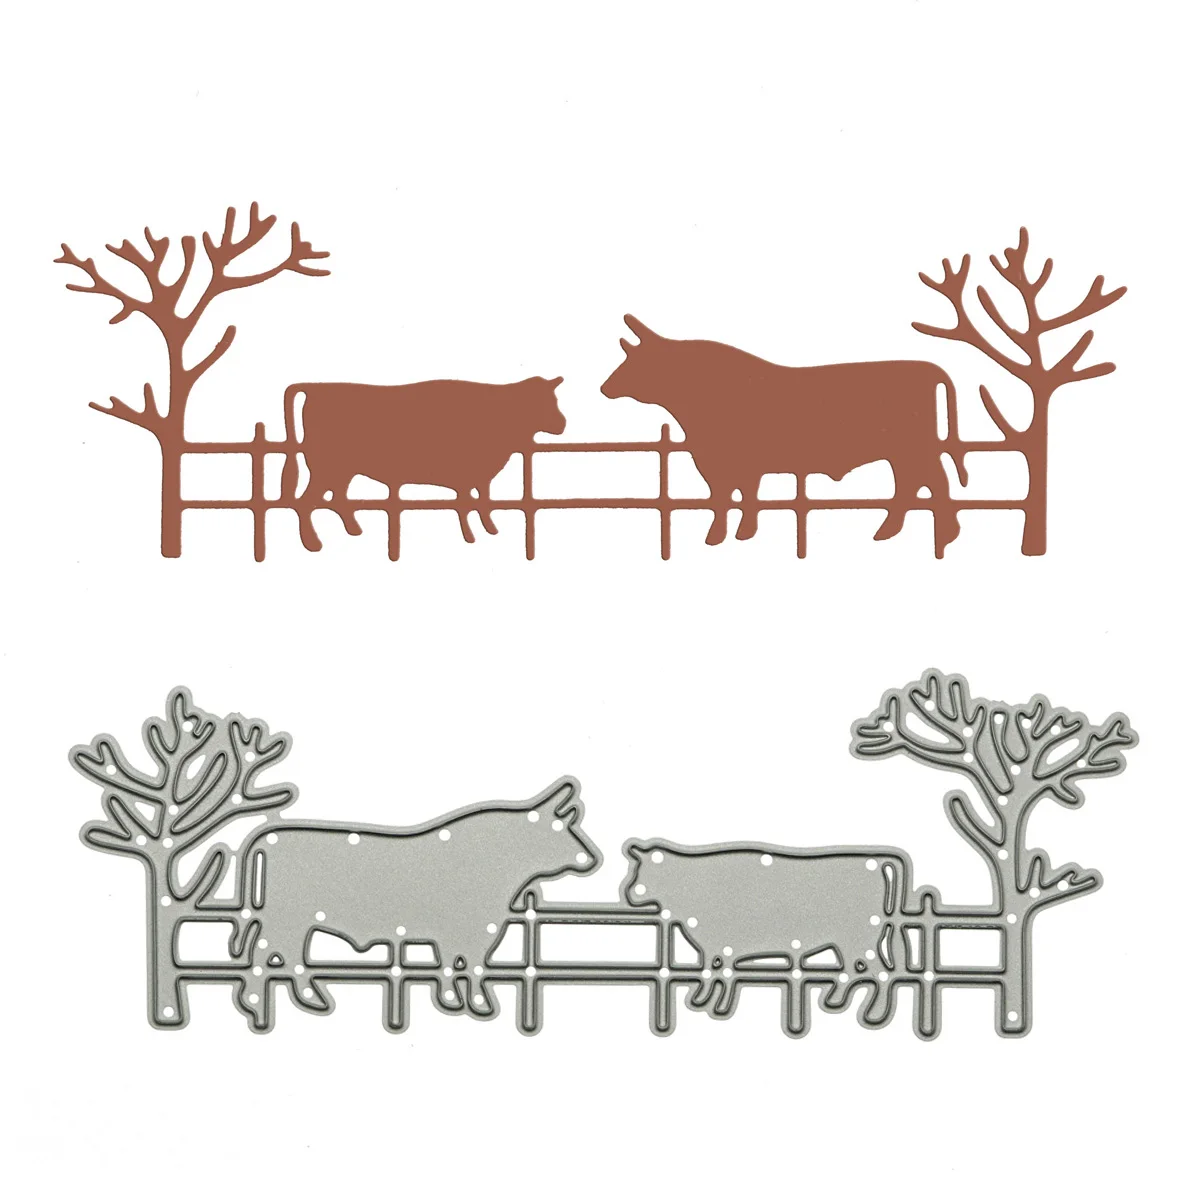 Farm Cows Cattle In Fence Pattern Metal Cutting Dies Scrapbooking Mold For Clipart Tourism Photo Album Diary Decorating